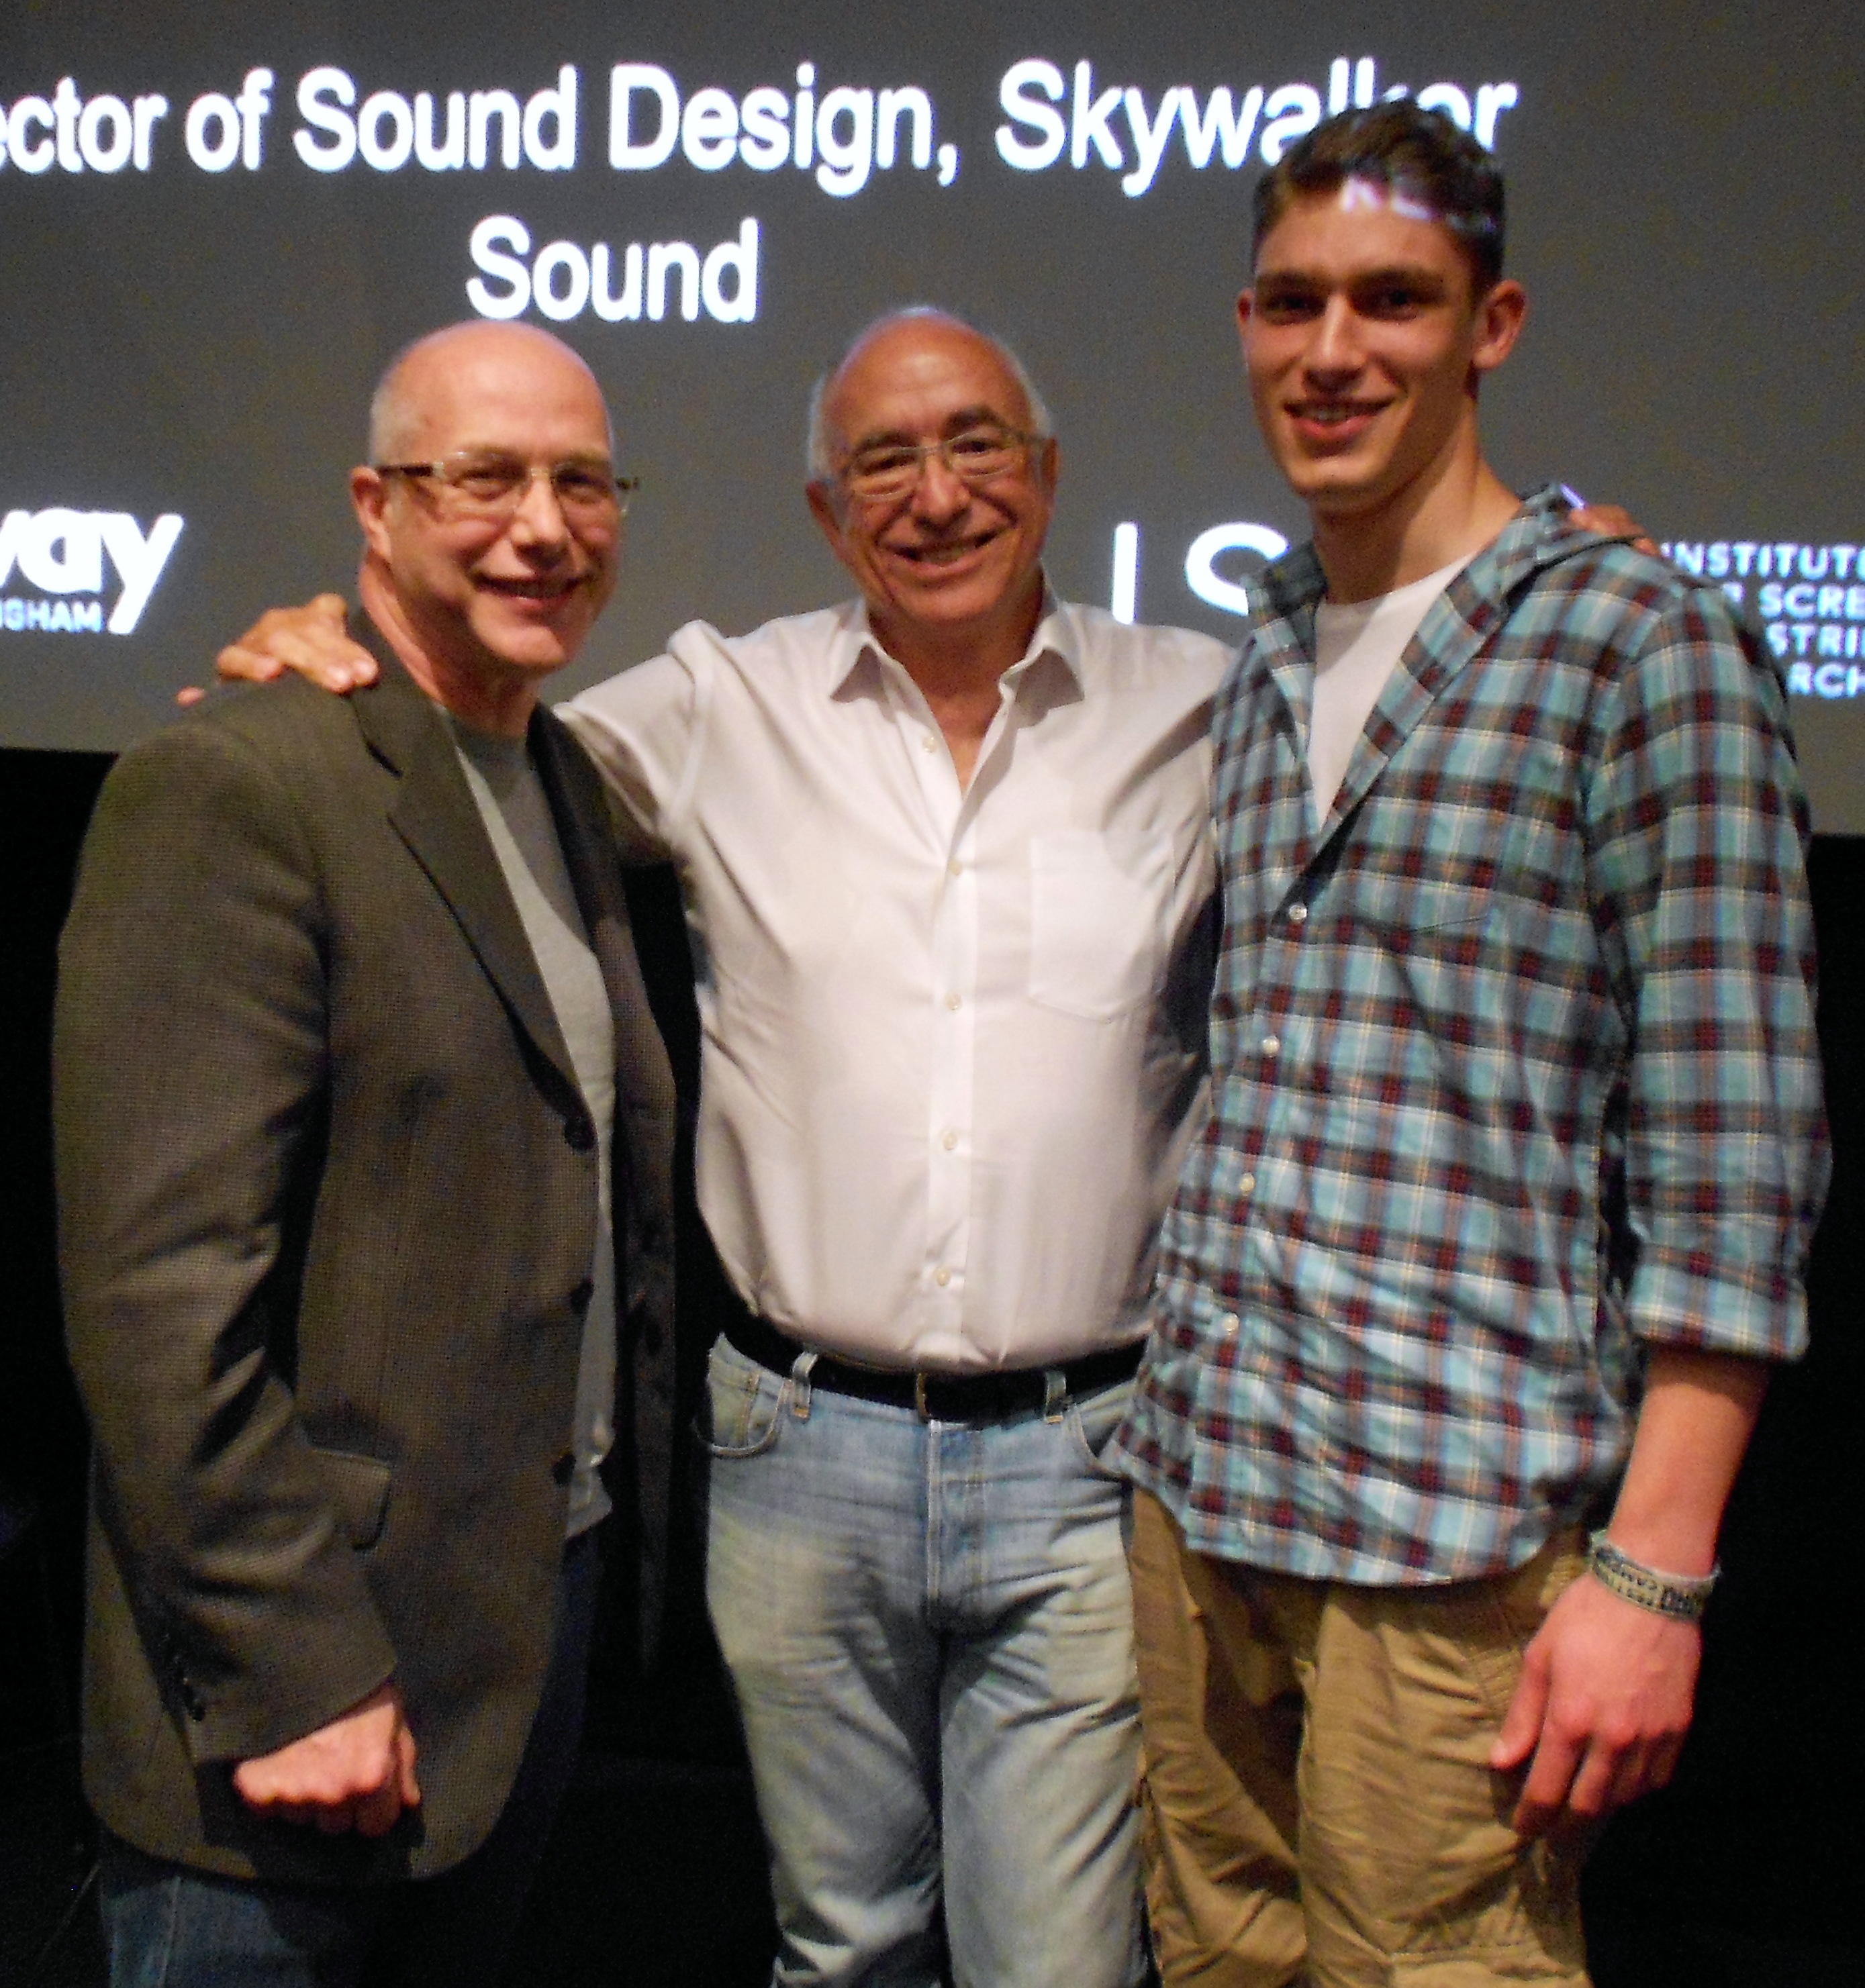 The Audio Suite's Neil Hillman MPSE(L)and Dan Rhodes(R)with Skywaker Direct of Sound Randy Thom (C), June 29th 2012.